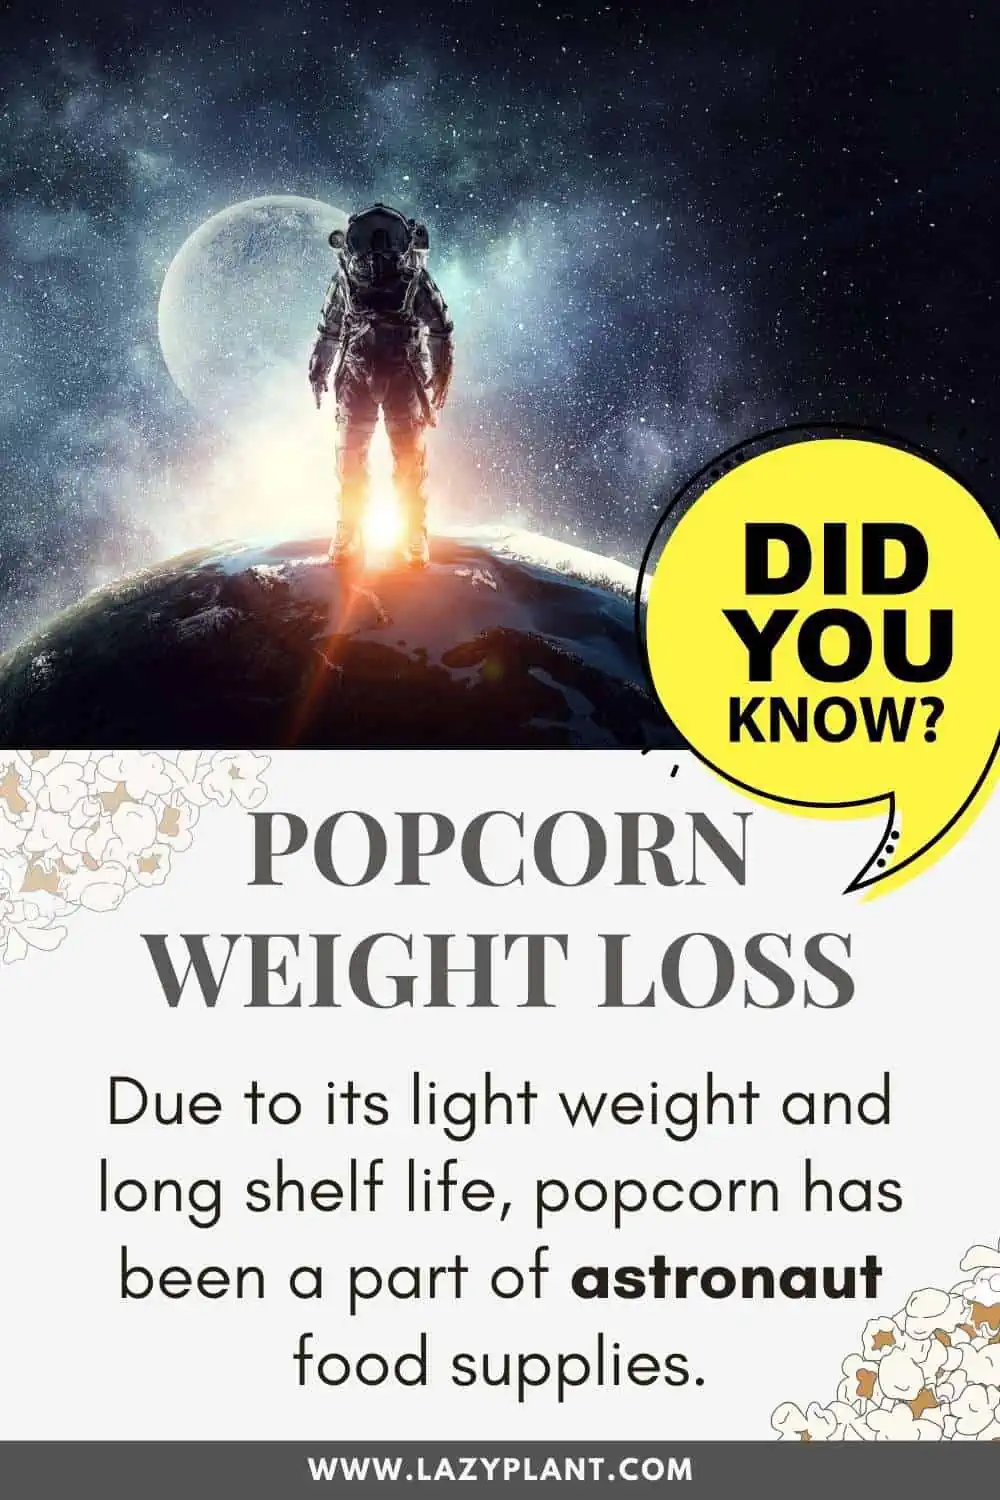 12 Fun Facts about Popcorn!